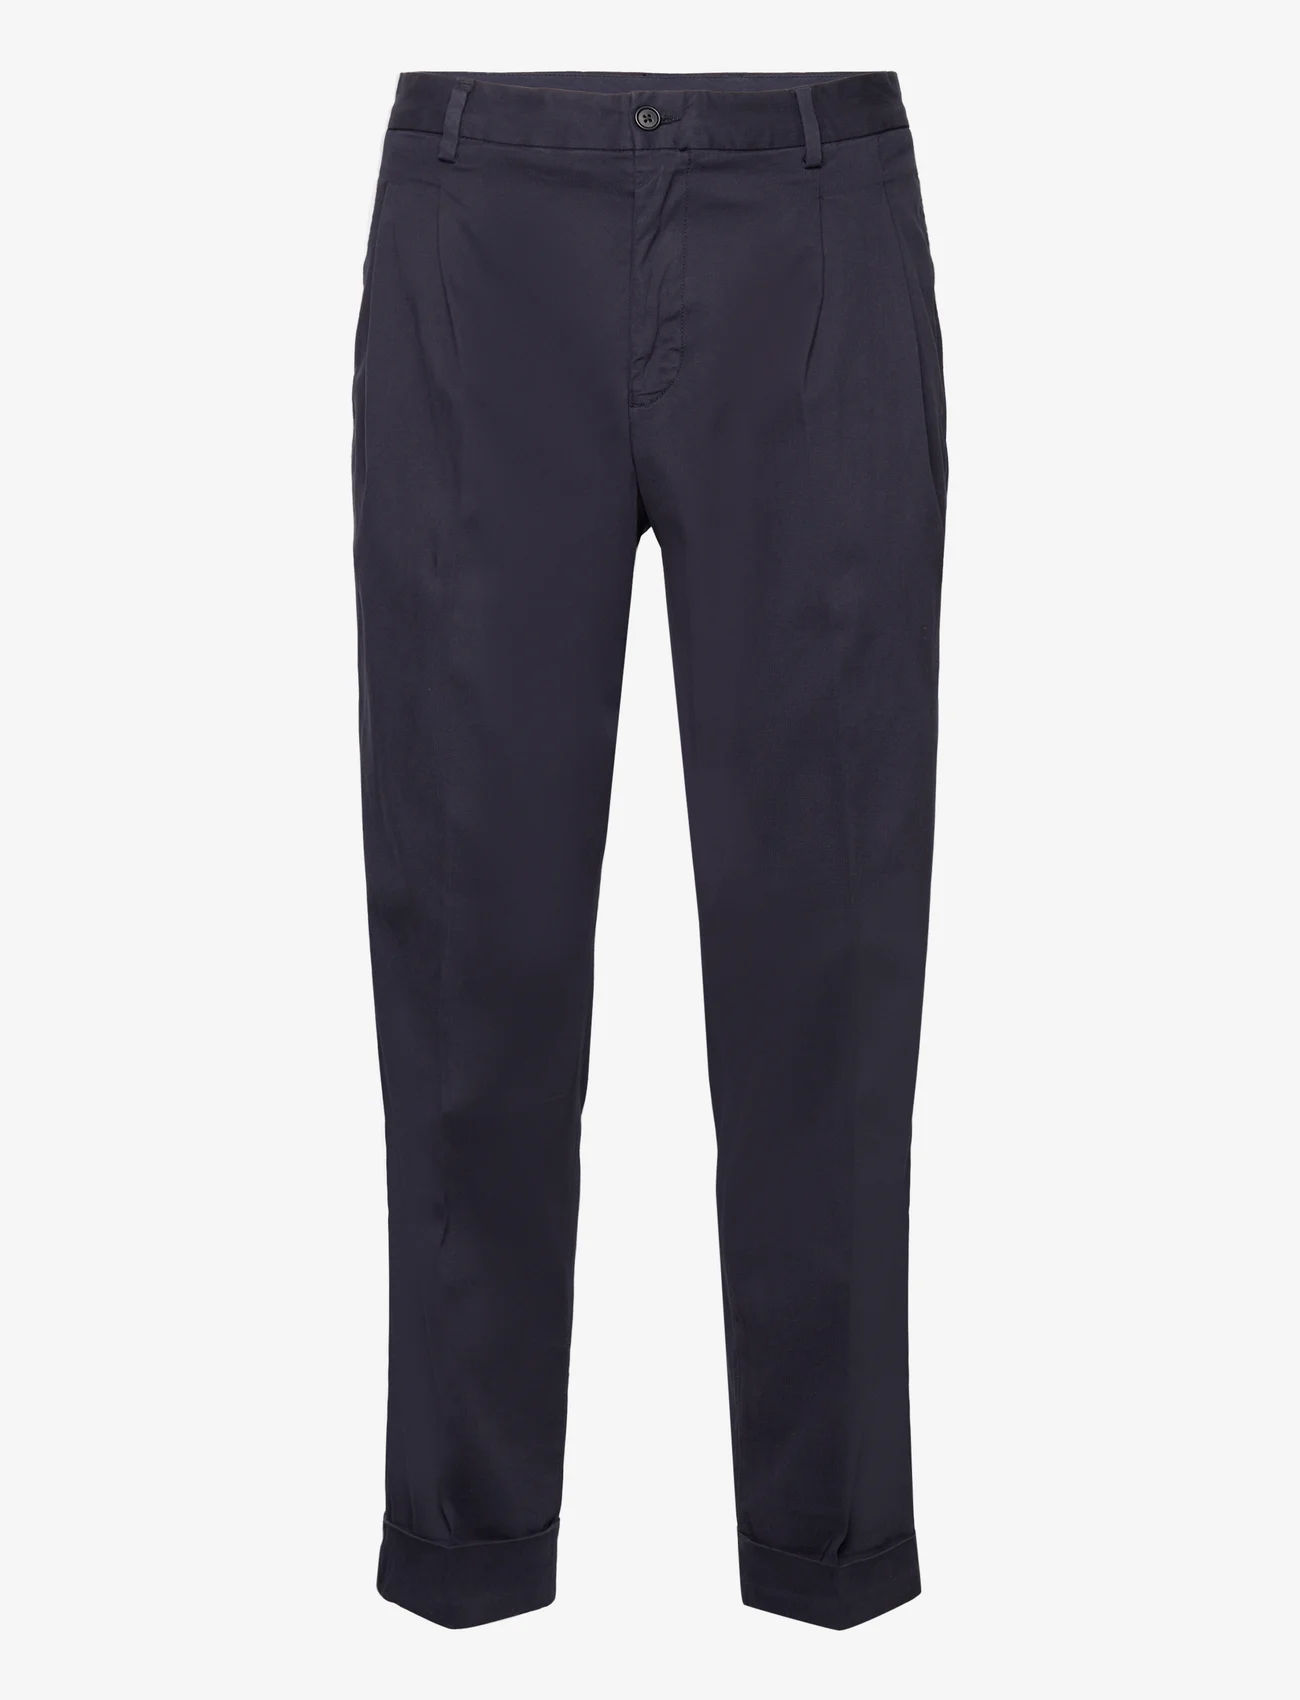 GANT - RELAXED TAPERED COTTON SUIT PANTS - chinot - evening blue - 0